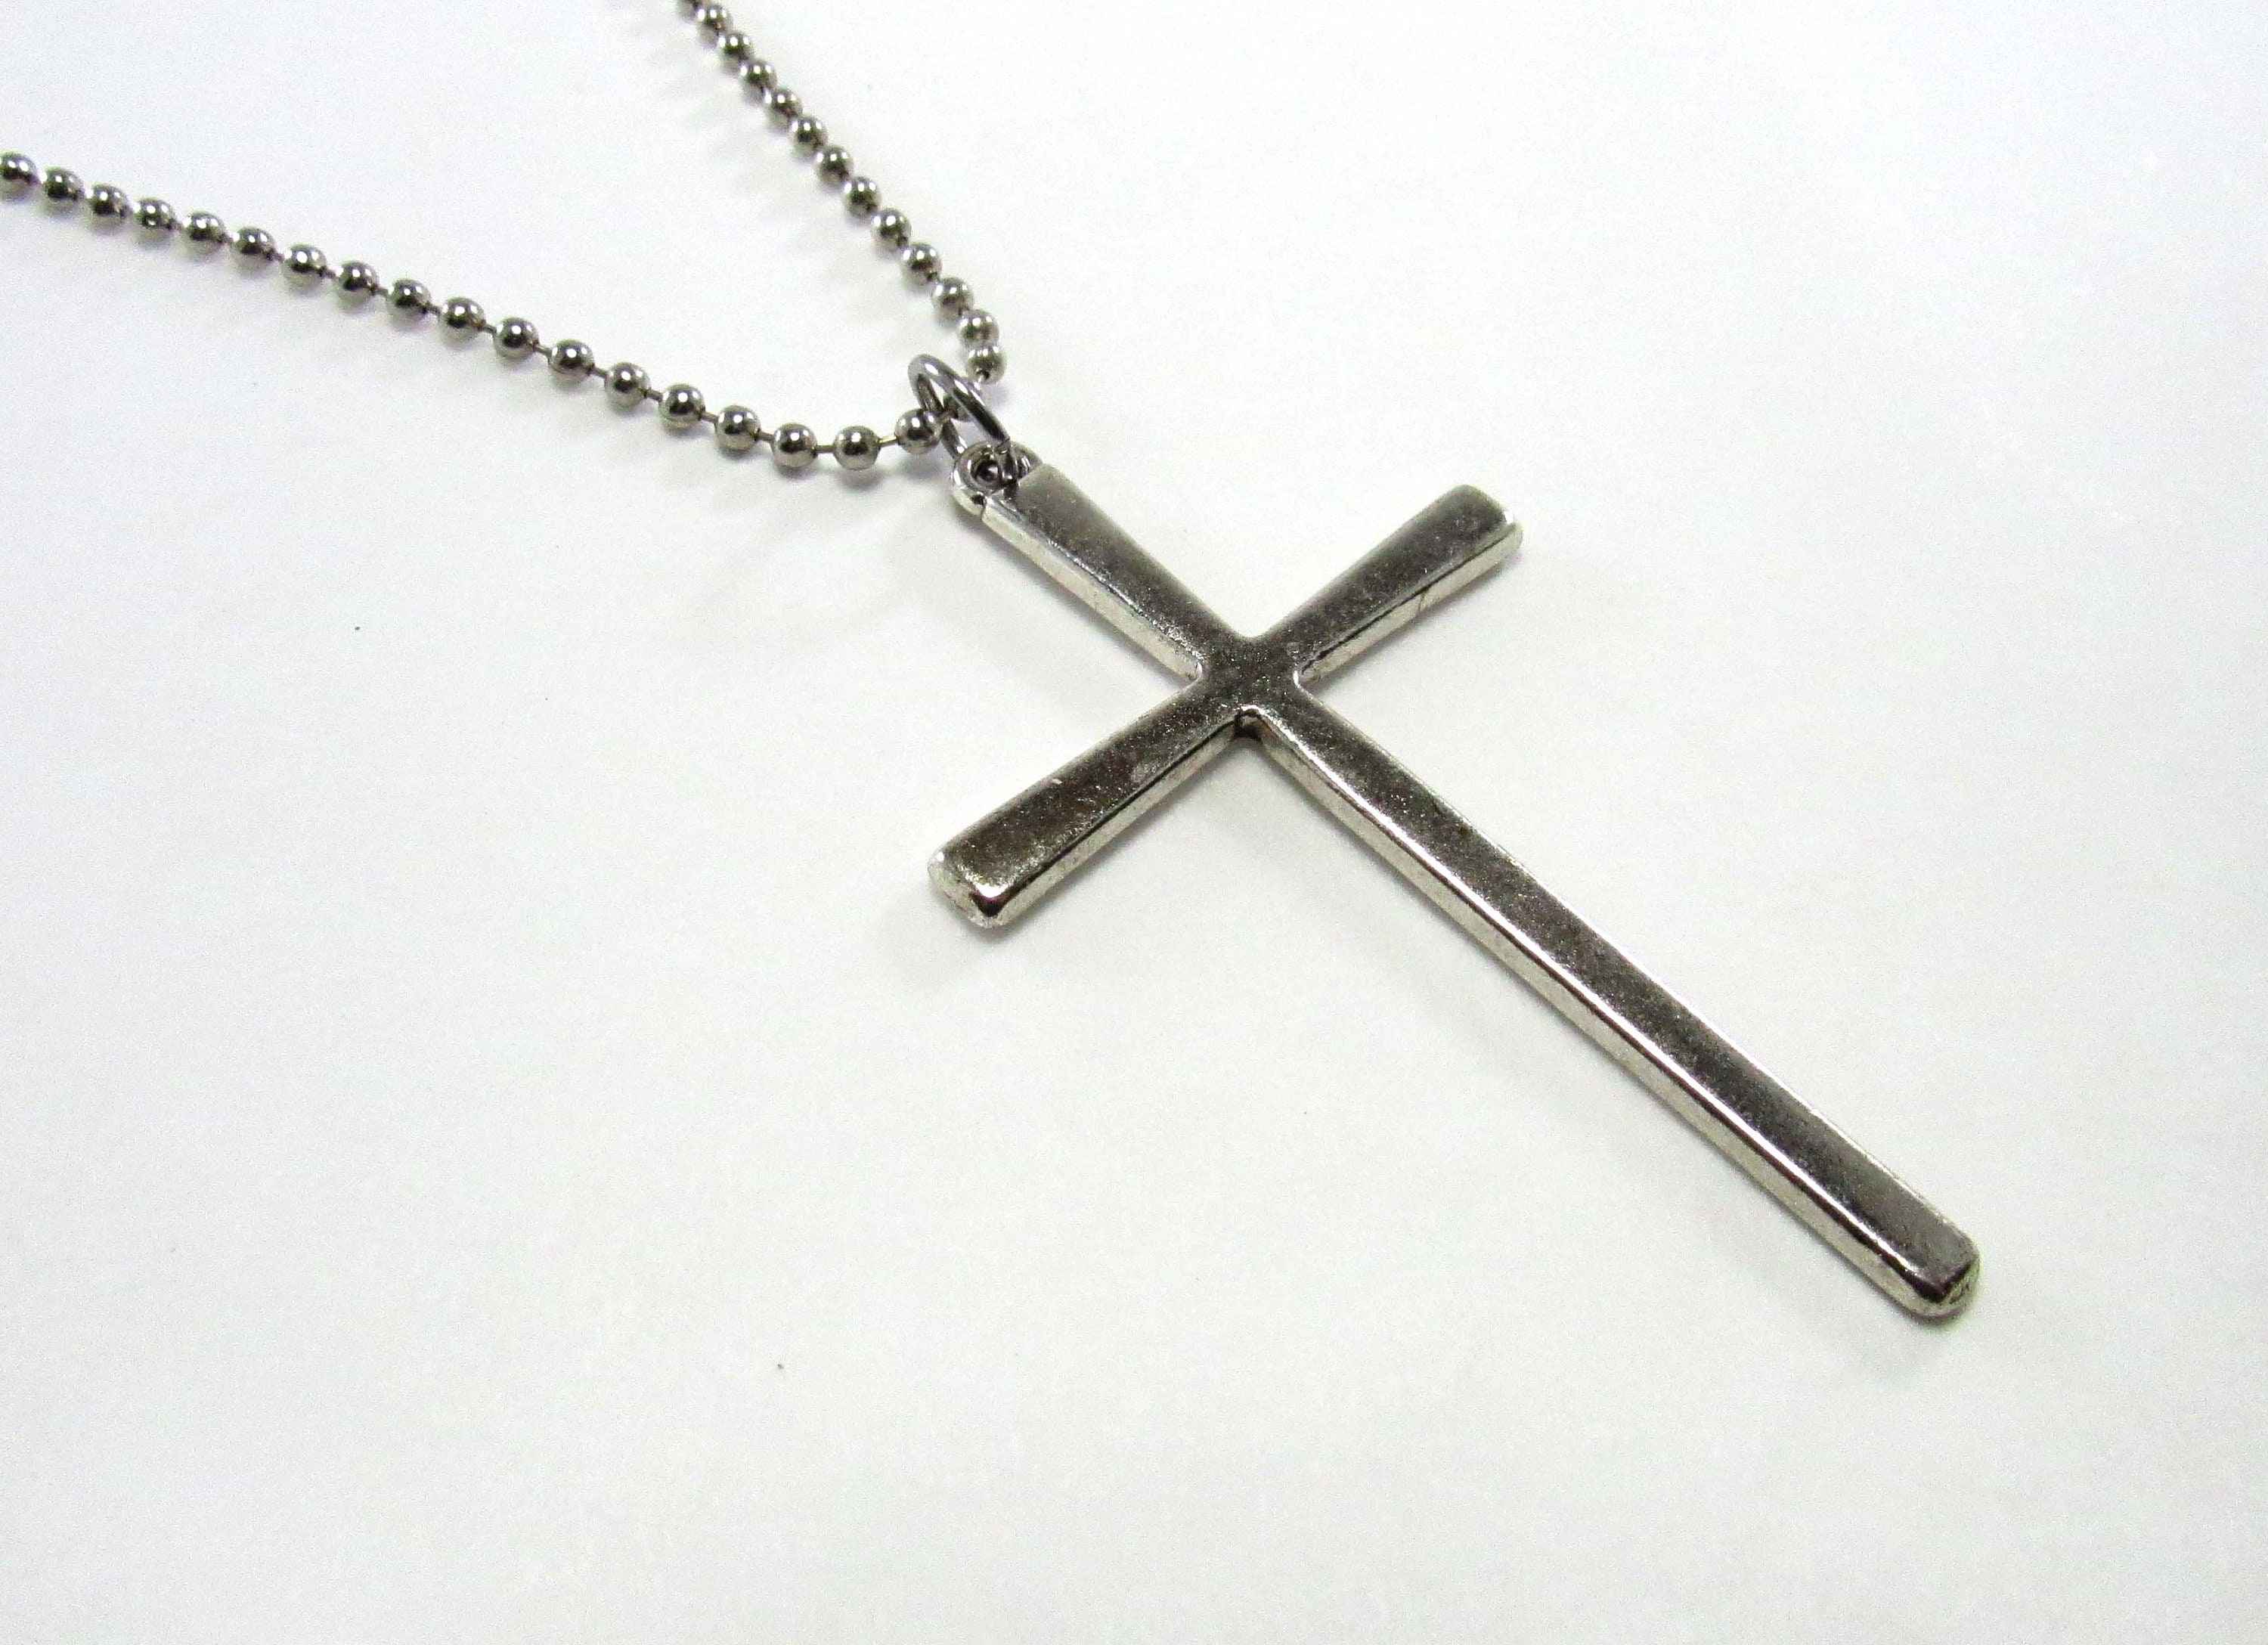 Cross Necklace .925 Sterling Silver with Brite Cuts - 18